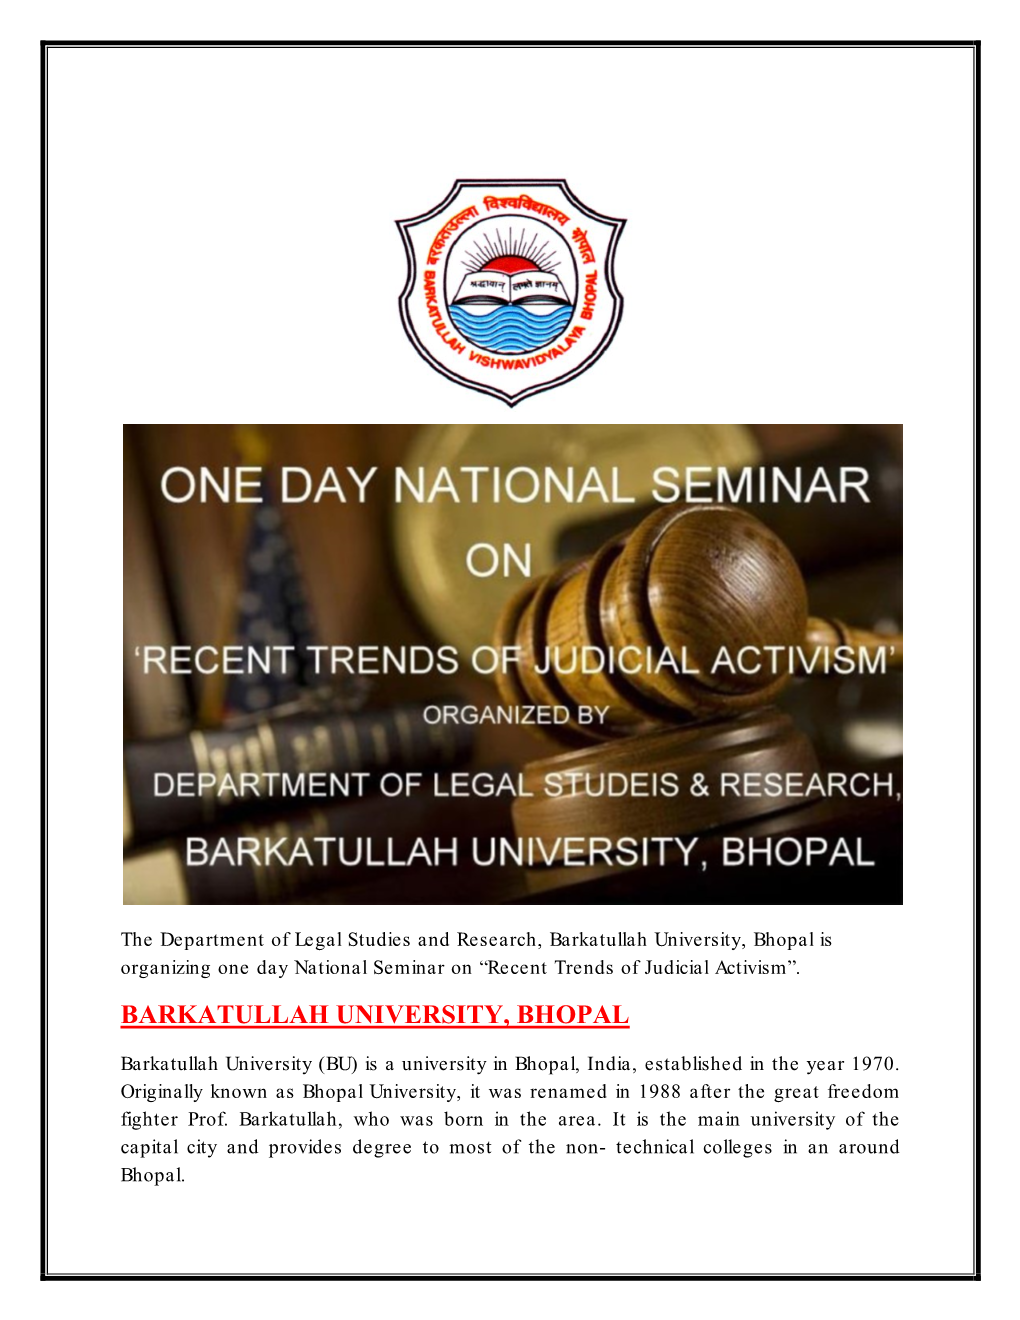 Barkatullah University, Bhopal Is Organizing One Day National Seminar on “Recent Trends of Judicial Activism”